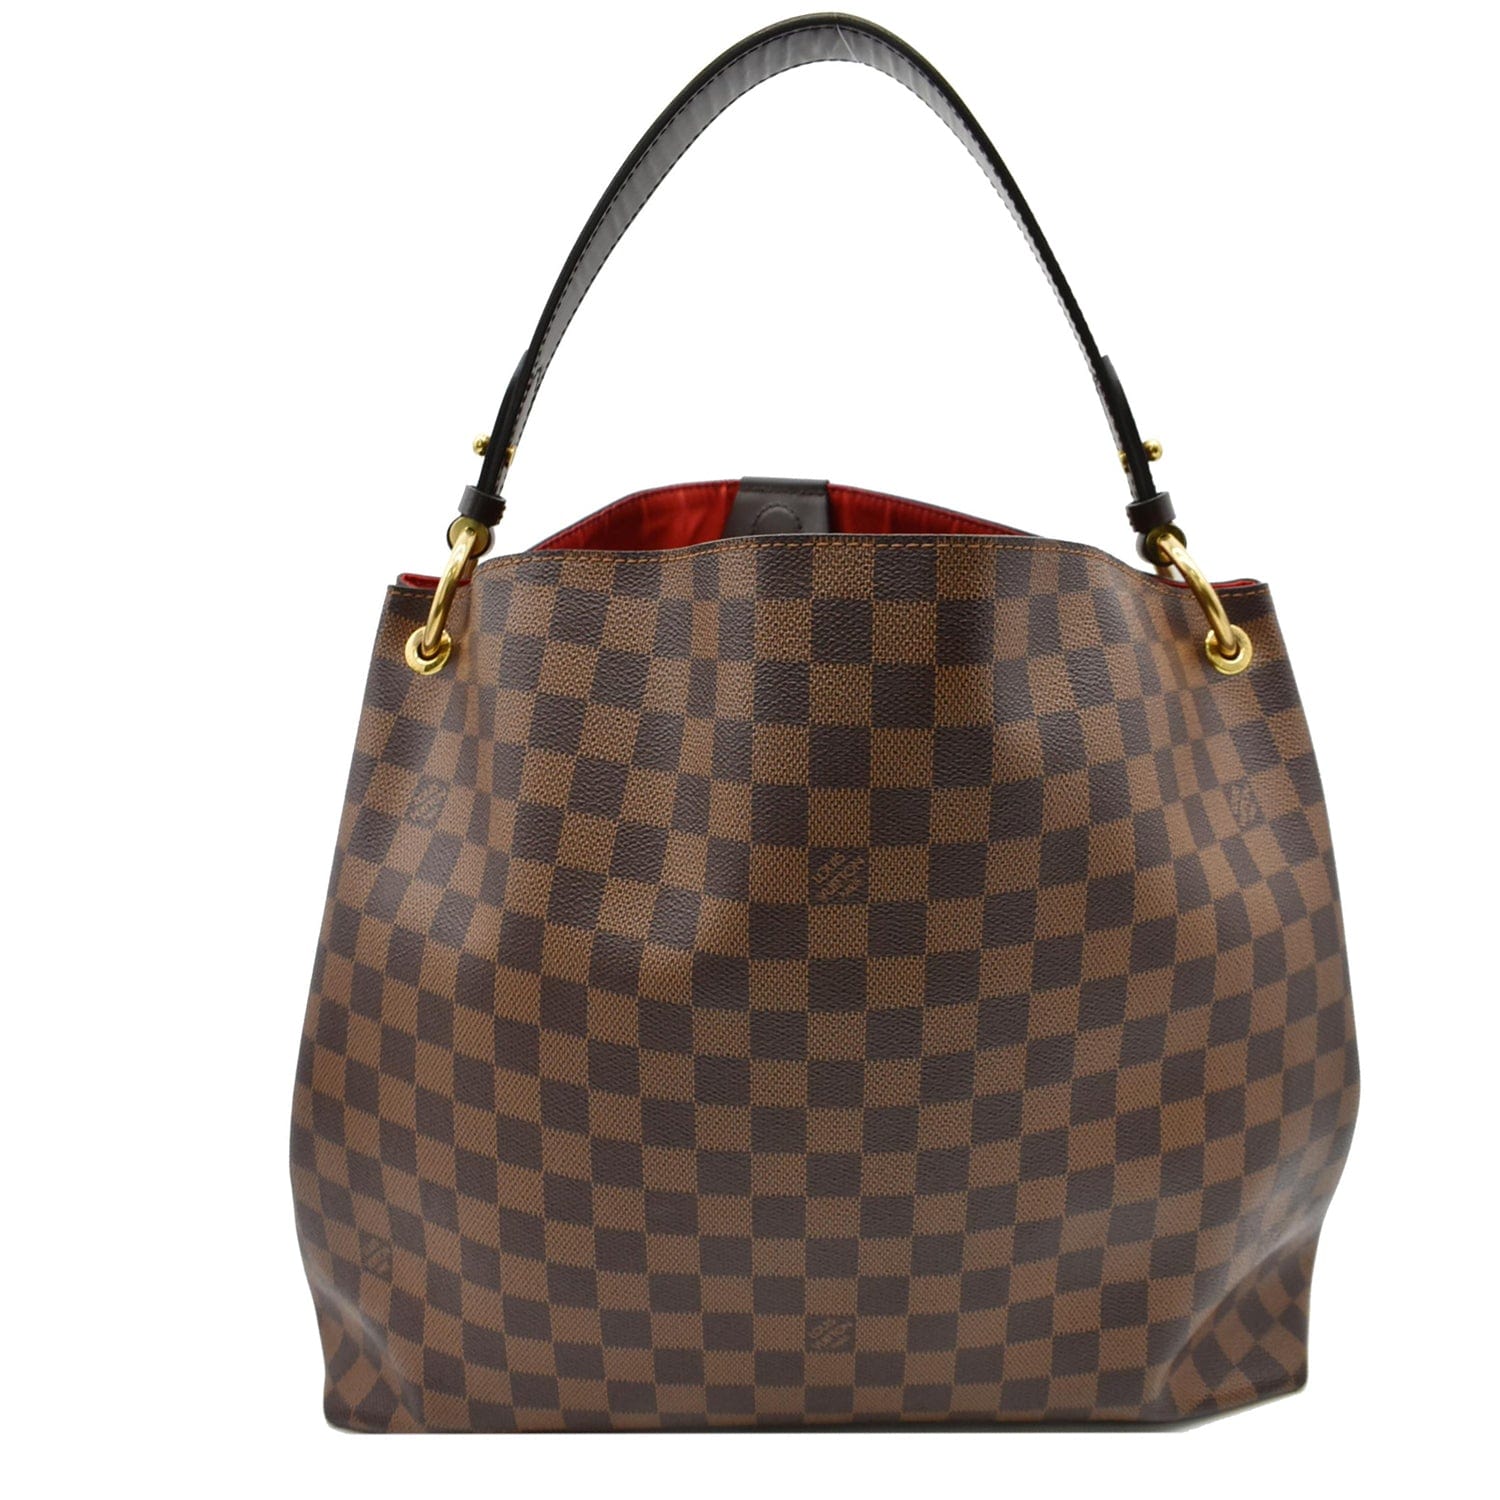 I like the size and shape of the Louis Vuitton Graceful MM but the sho, tote bags